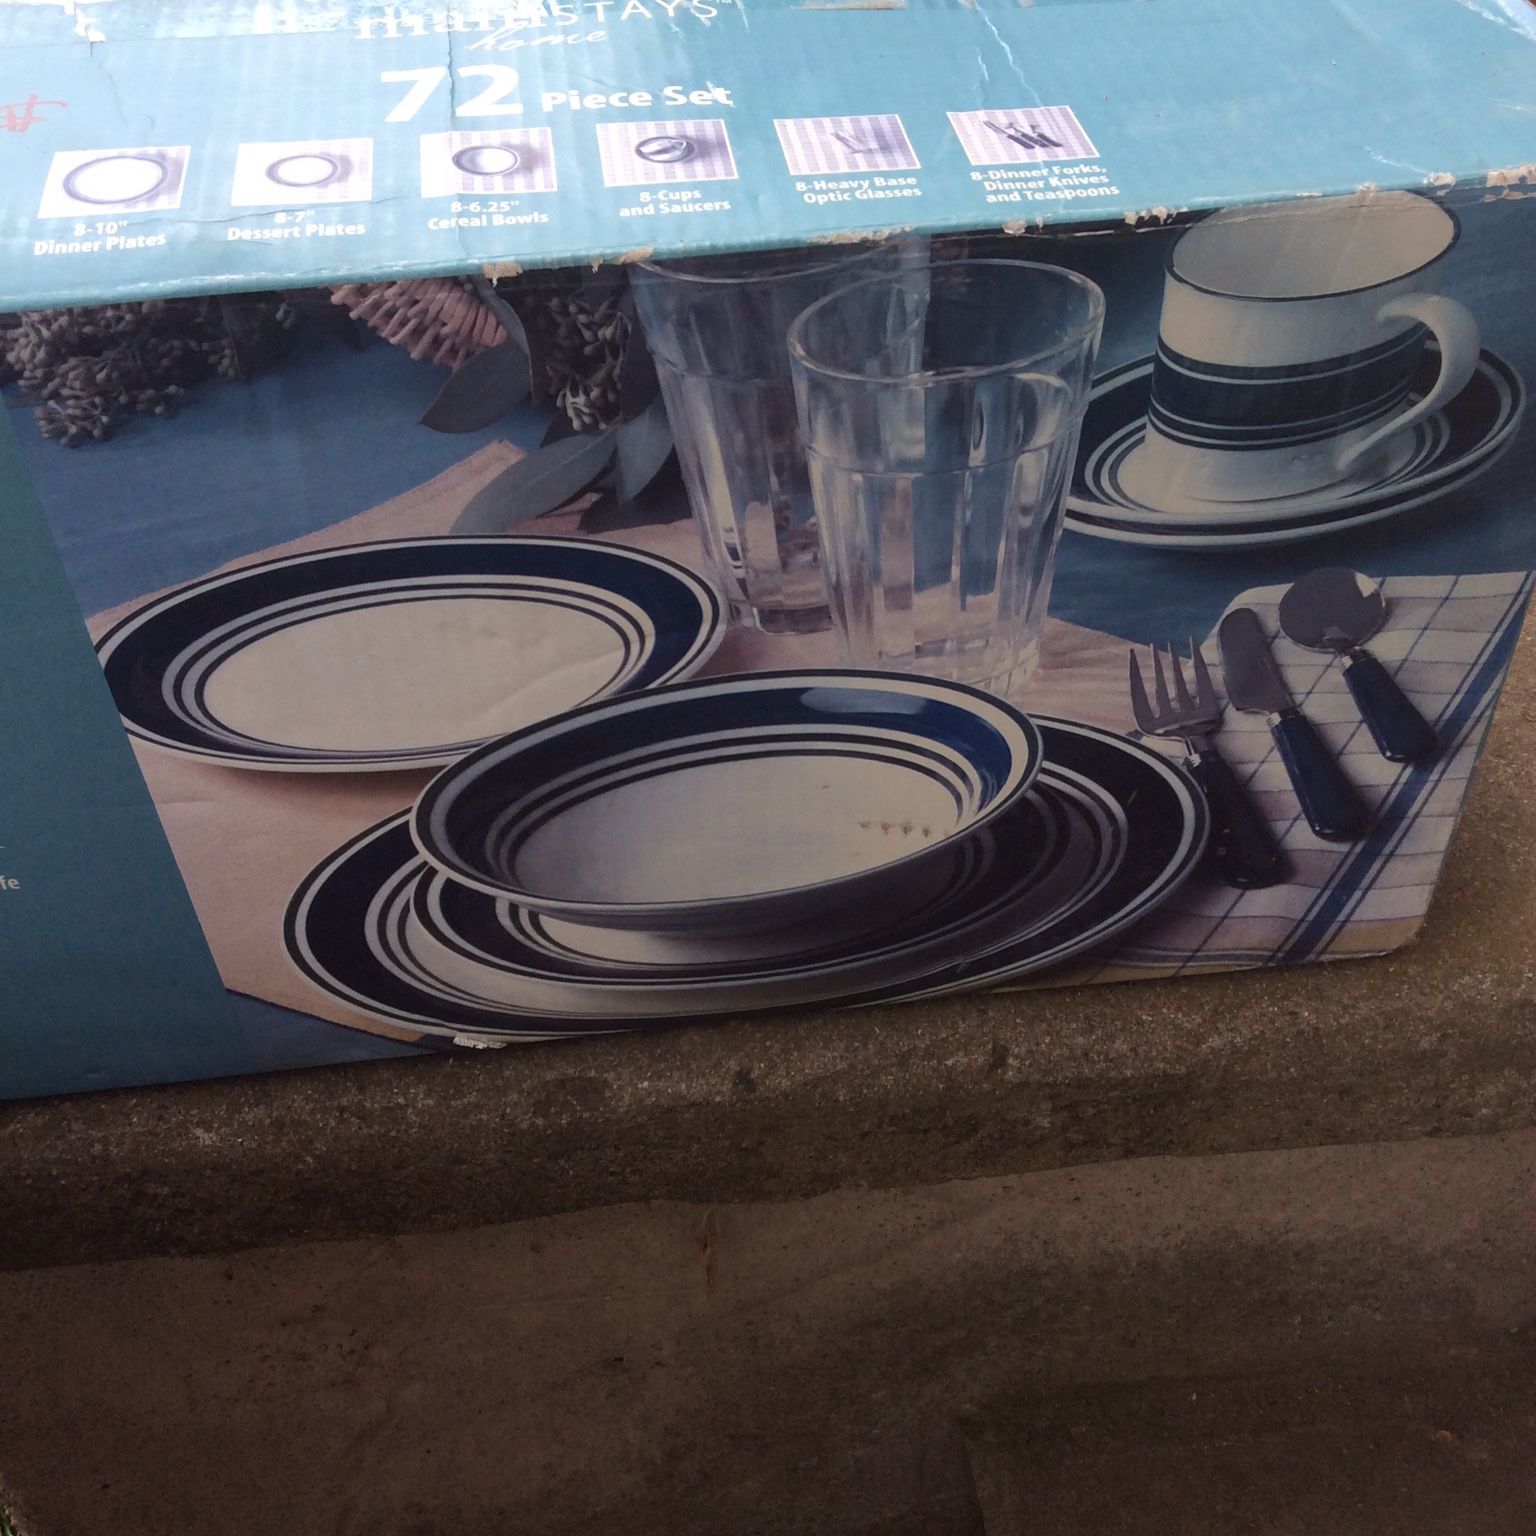 72 Pieces for Sale in Acampo, CA - OfferUp